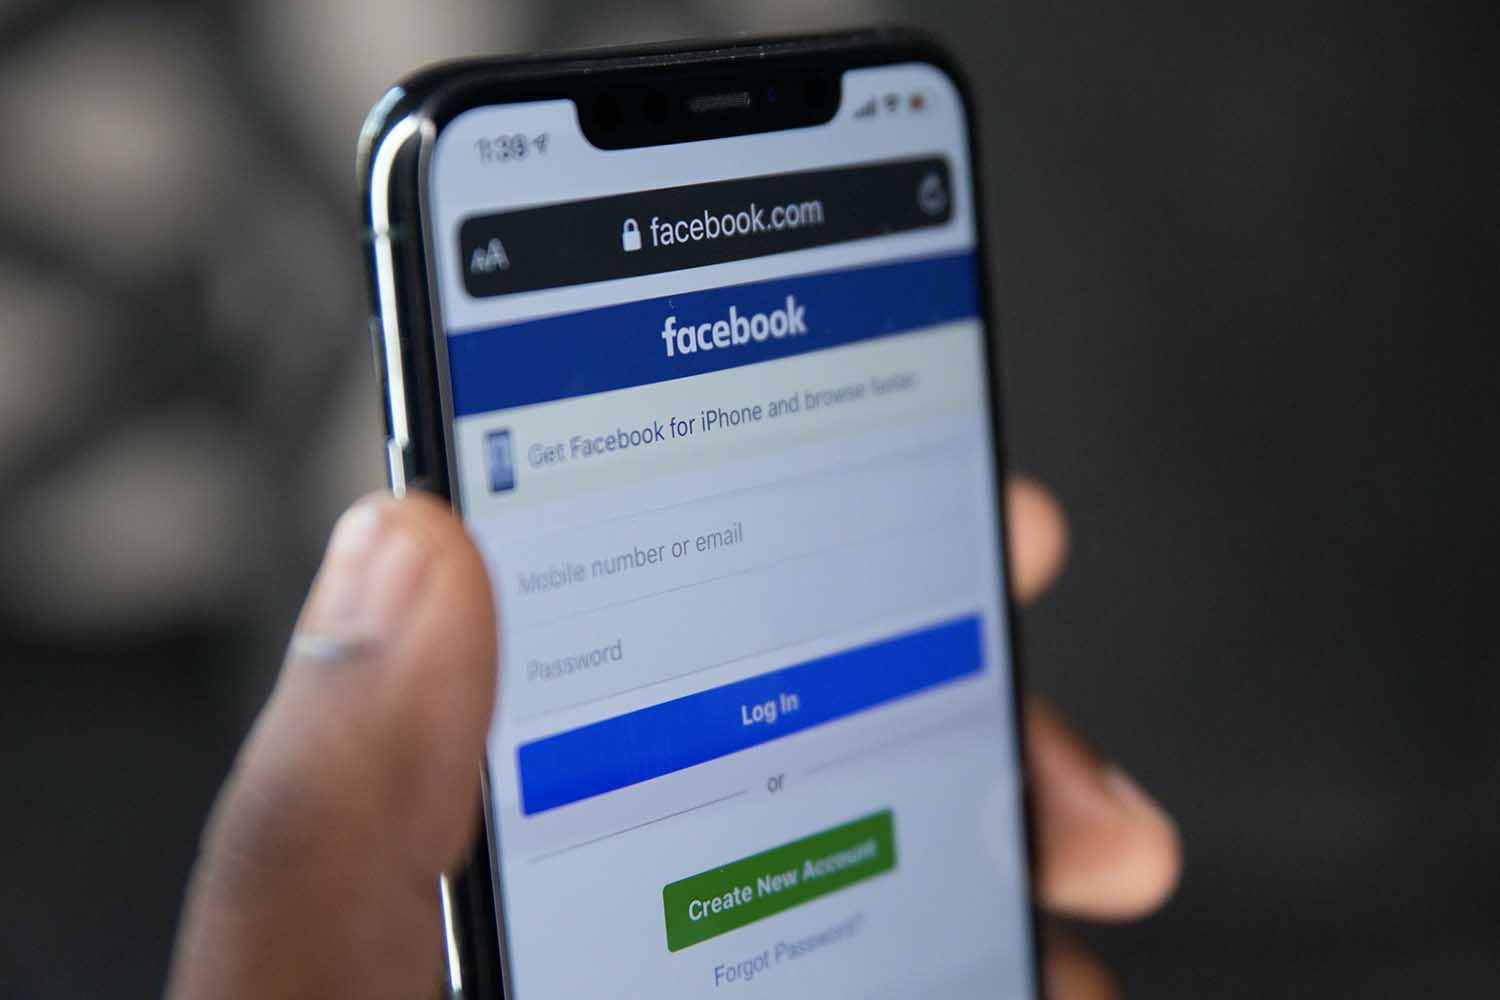 Man Creates Tool for Facebook Addiction, Gets Banned for Life